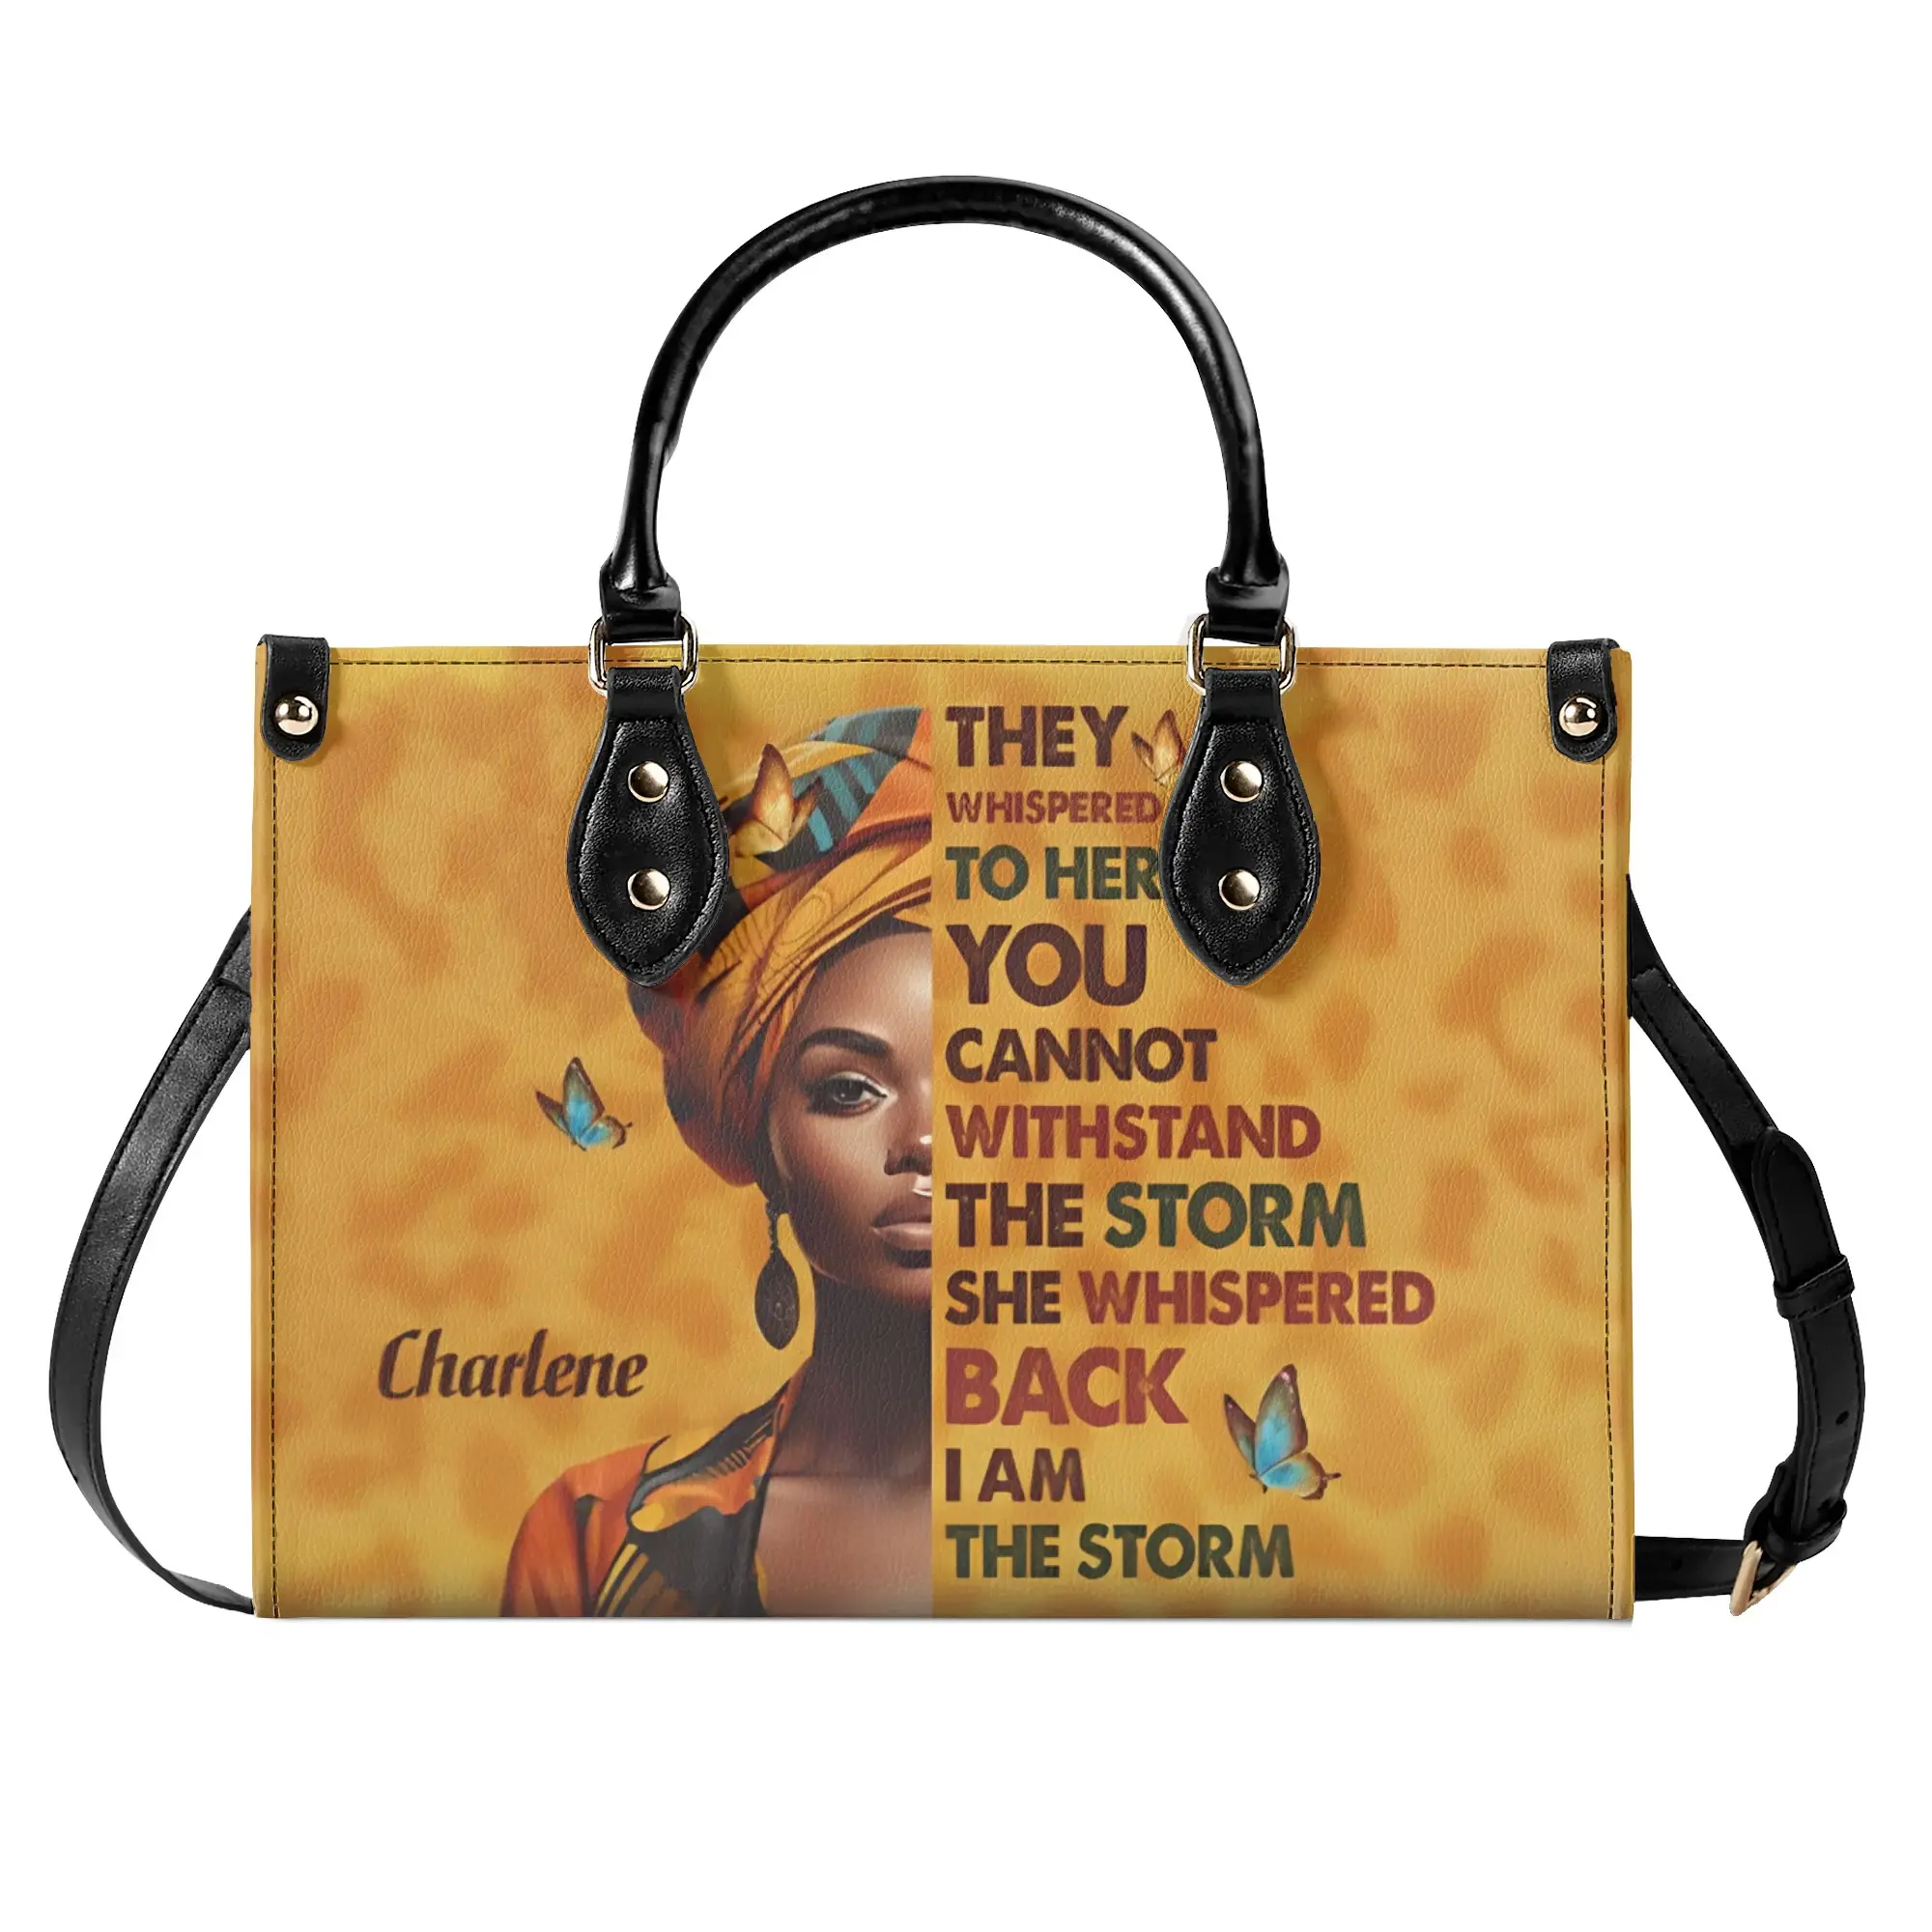 Personalized Leather Handbag  Am The Storm 